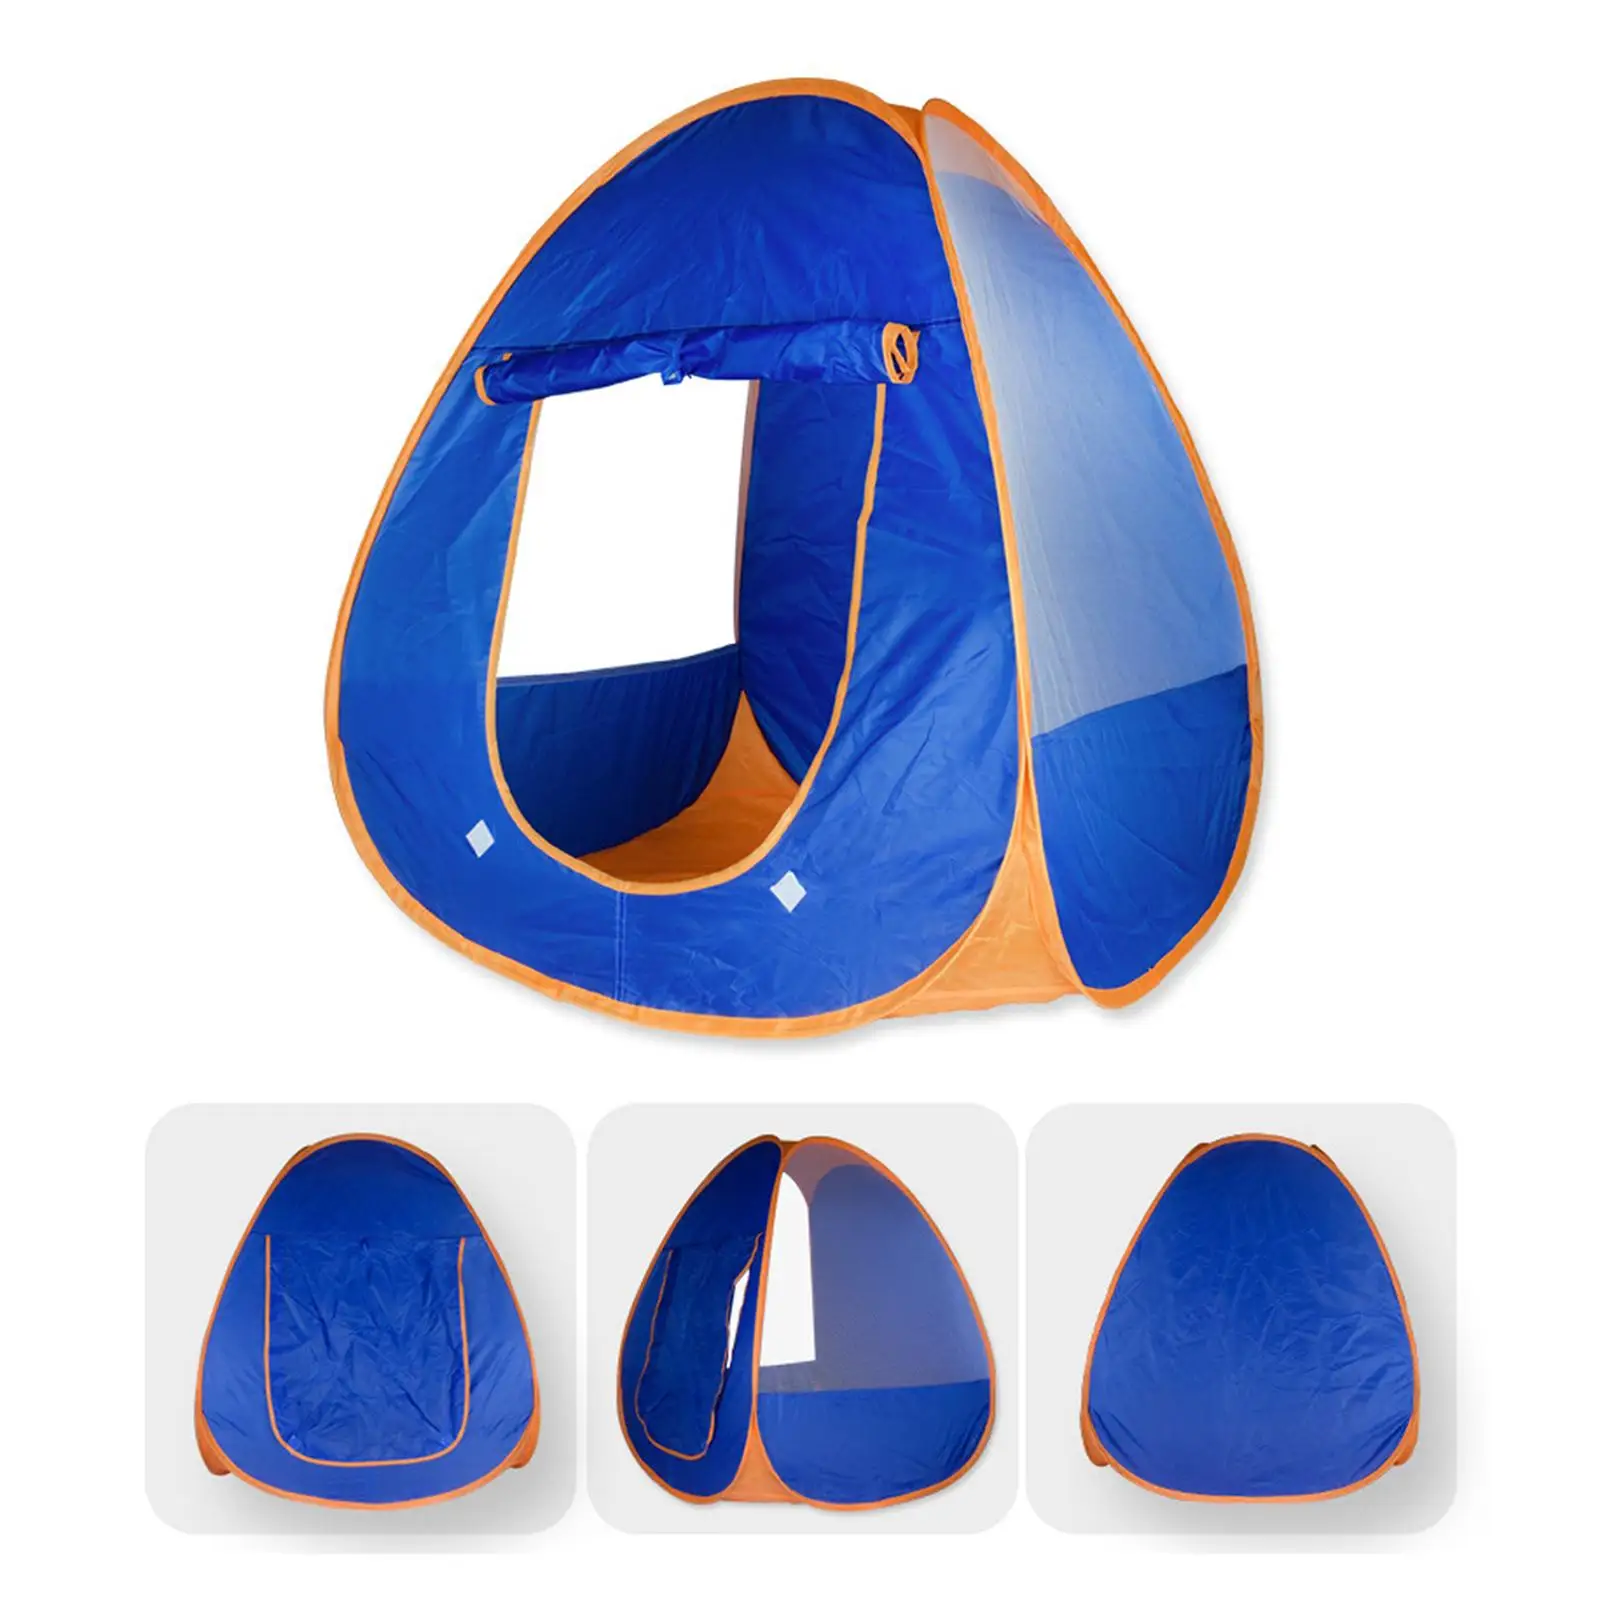 Kids Play Tent Foldable Portable Pretend Play Birthday Gifts for Girls Boys Child Room Decor for Game Parties Beach Camping Home